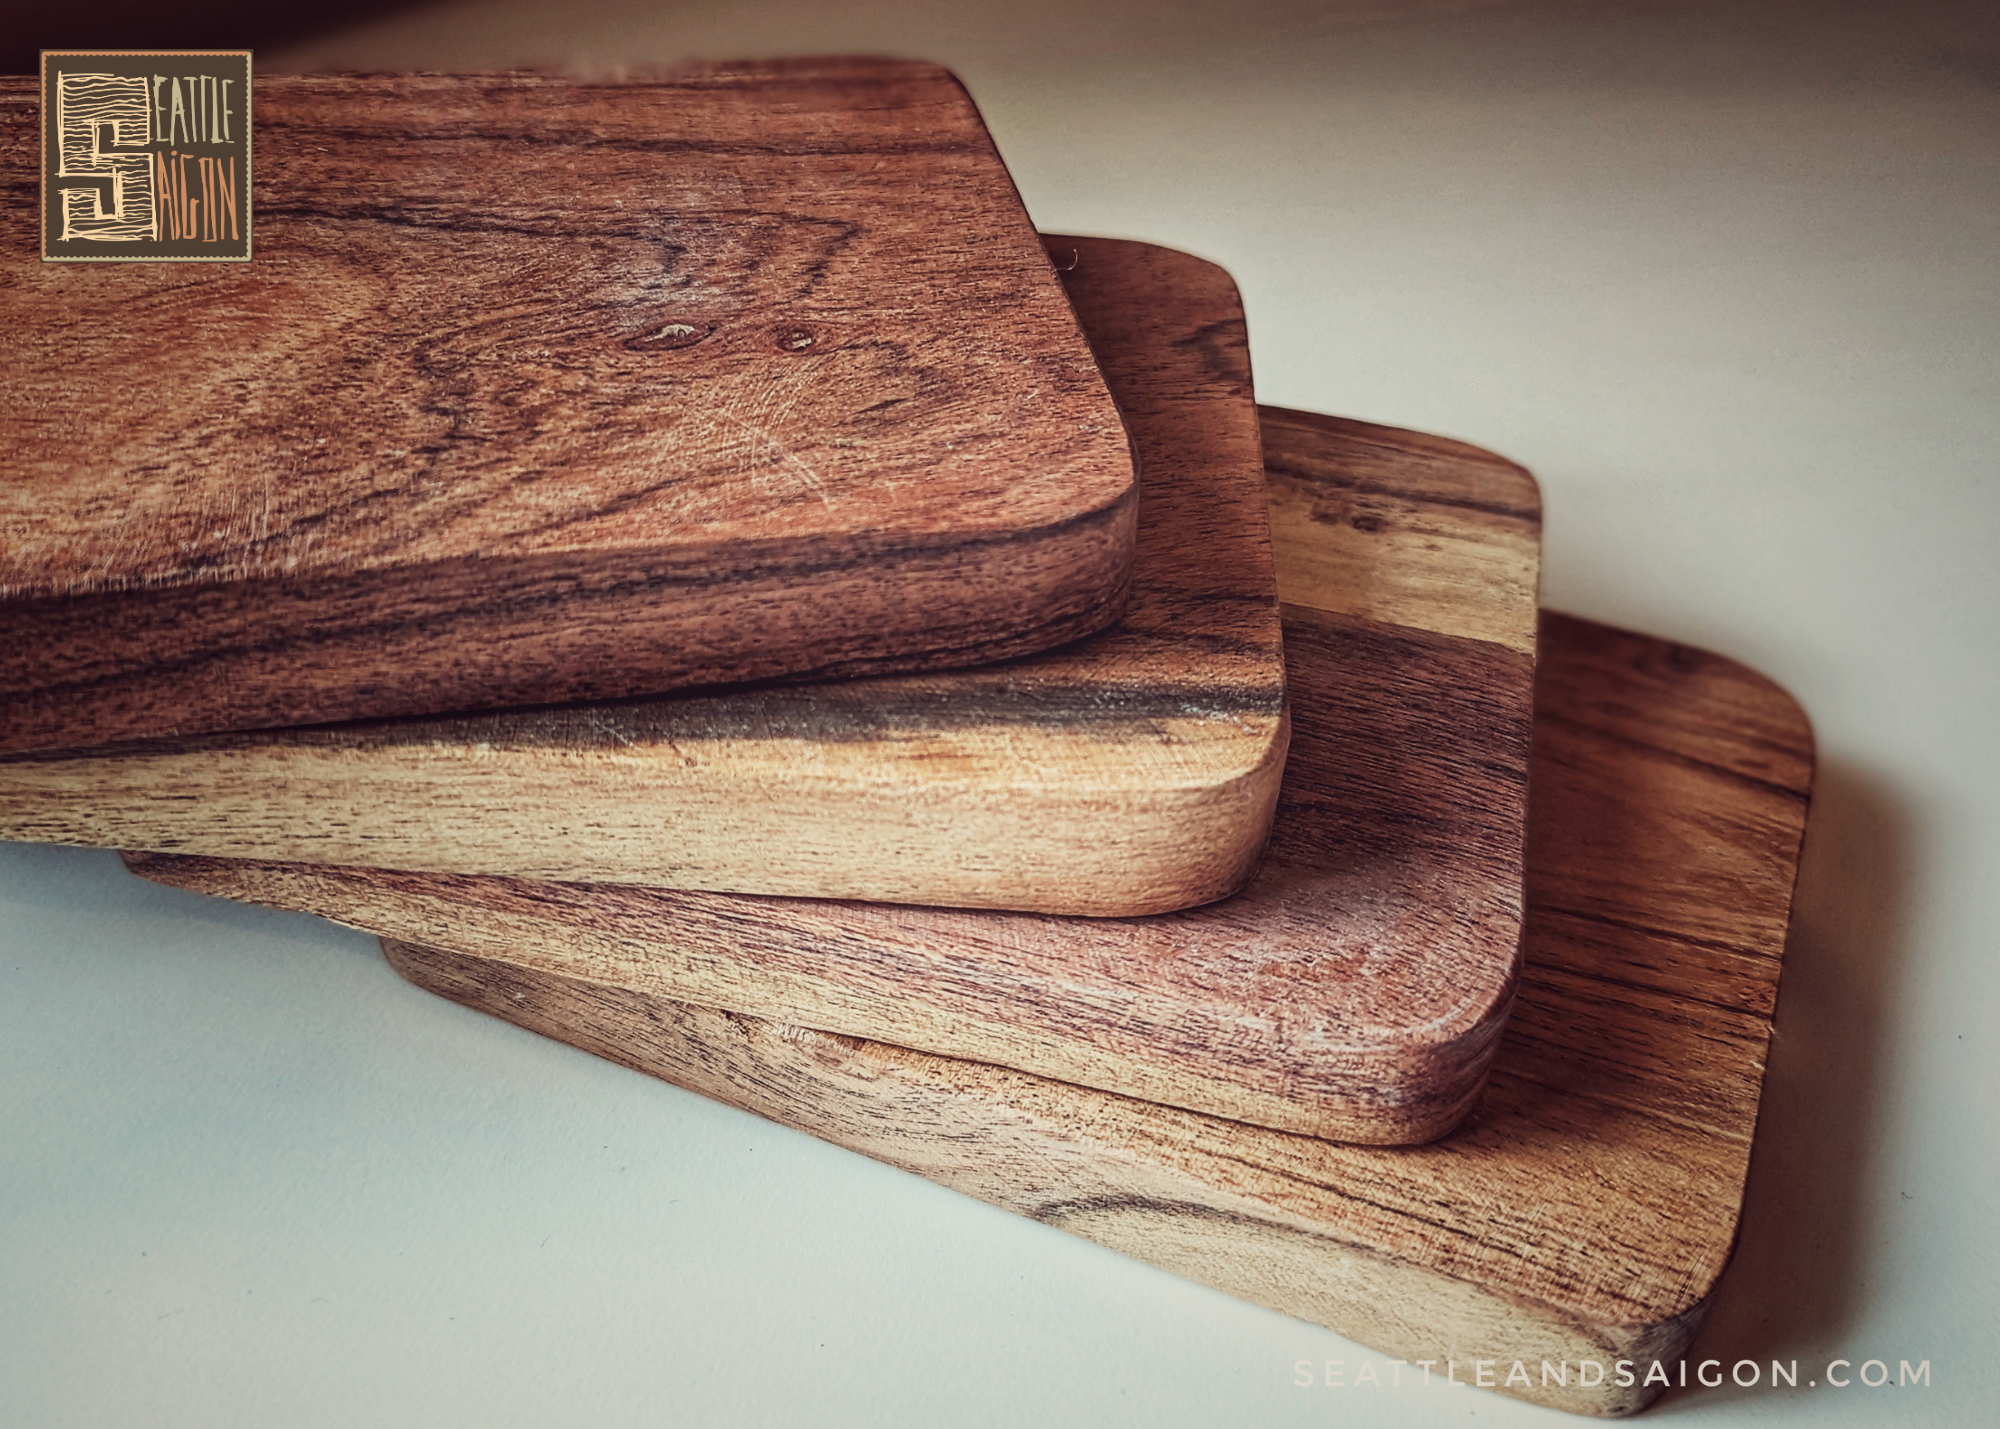 Wooden cutting boards from natural wood in the market. Handmade